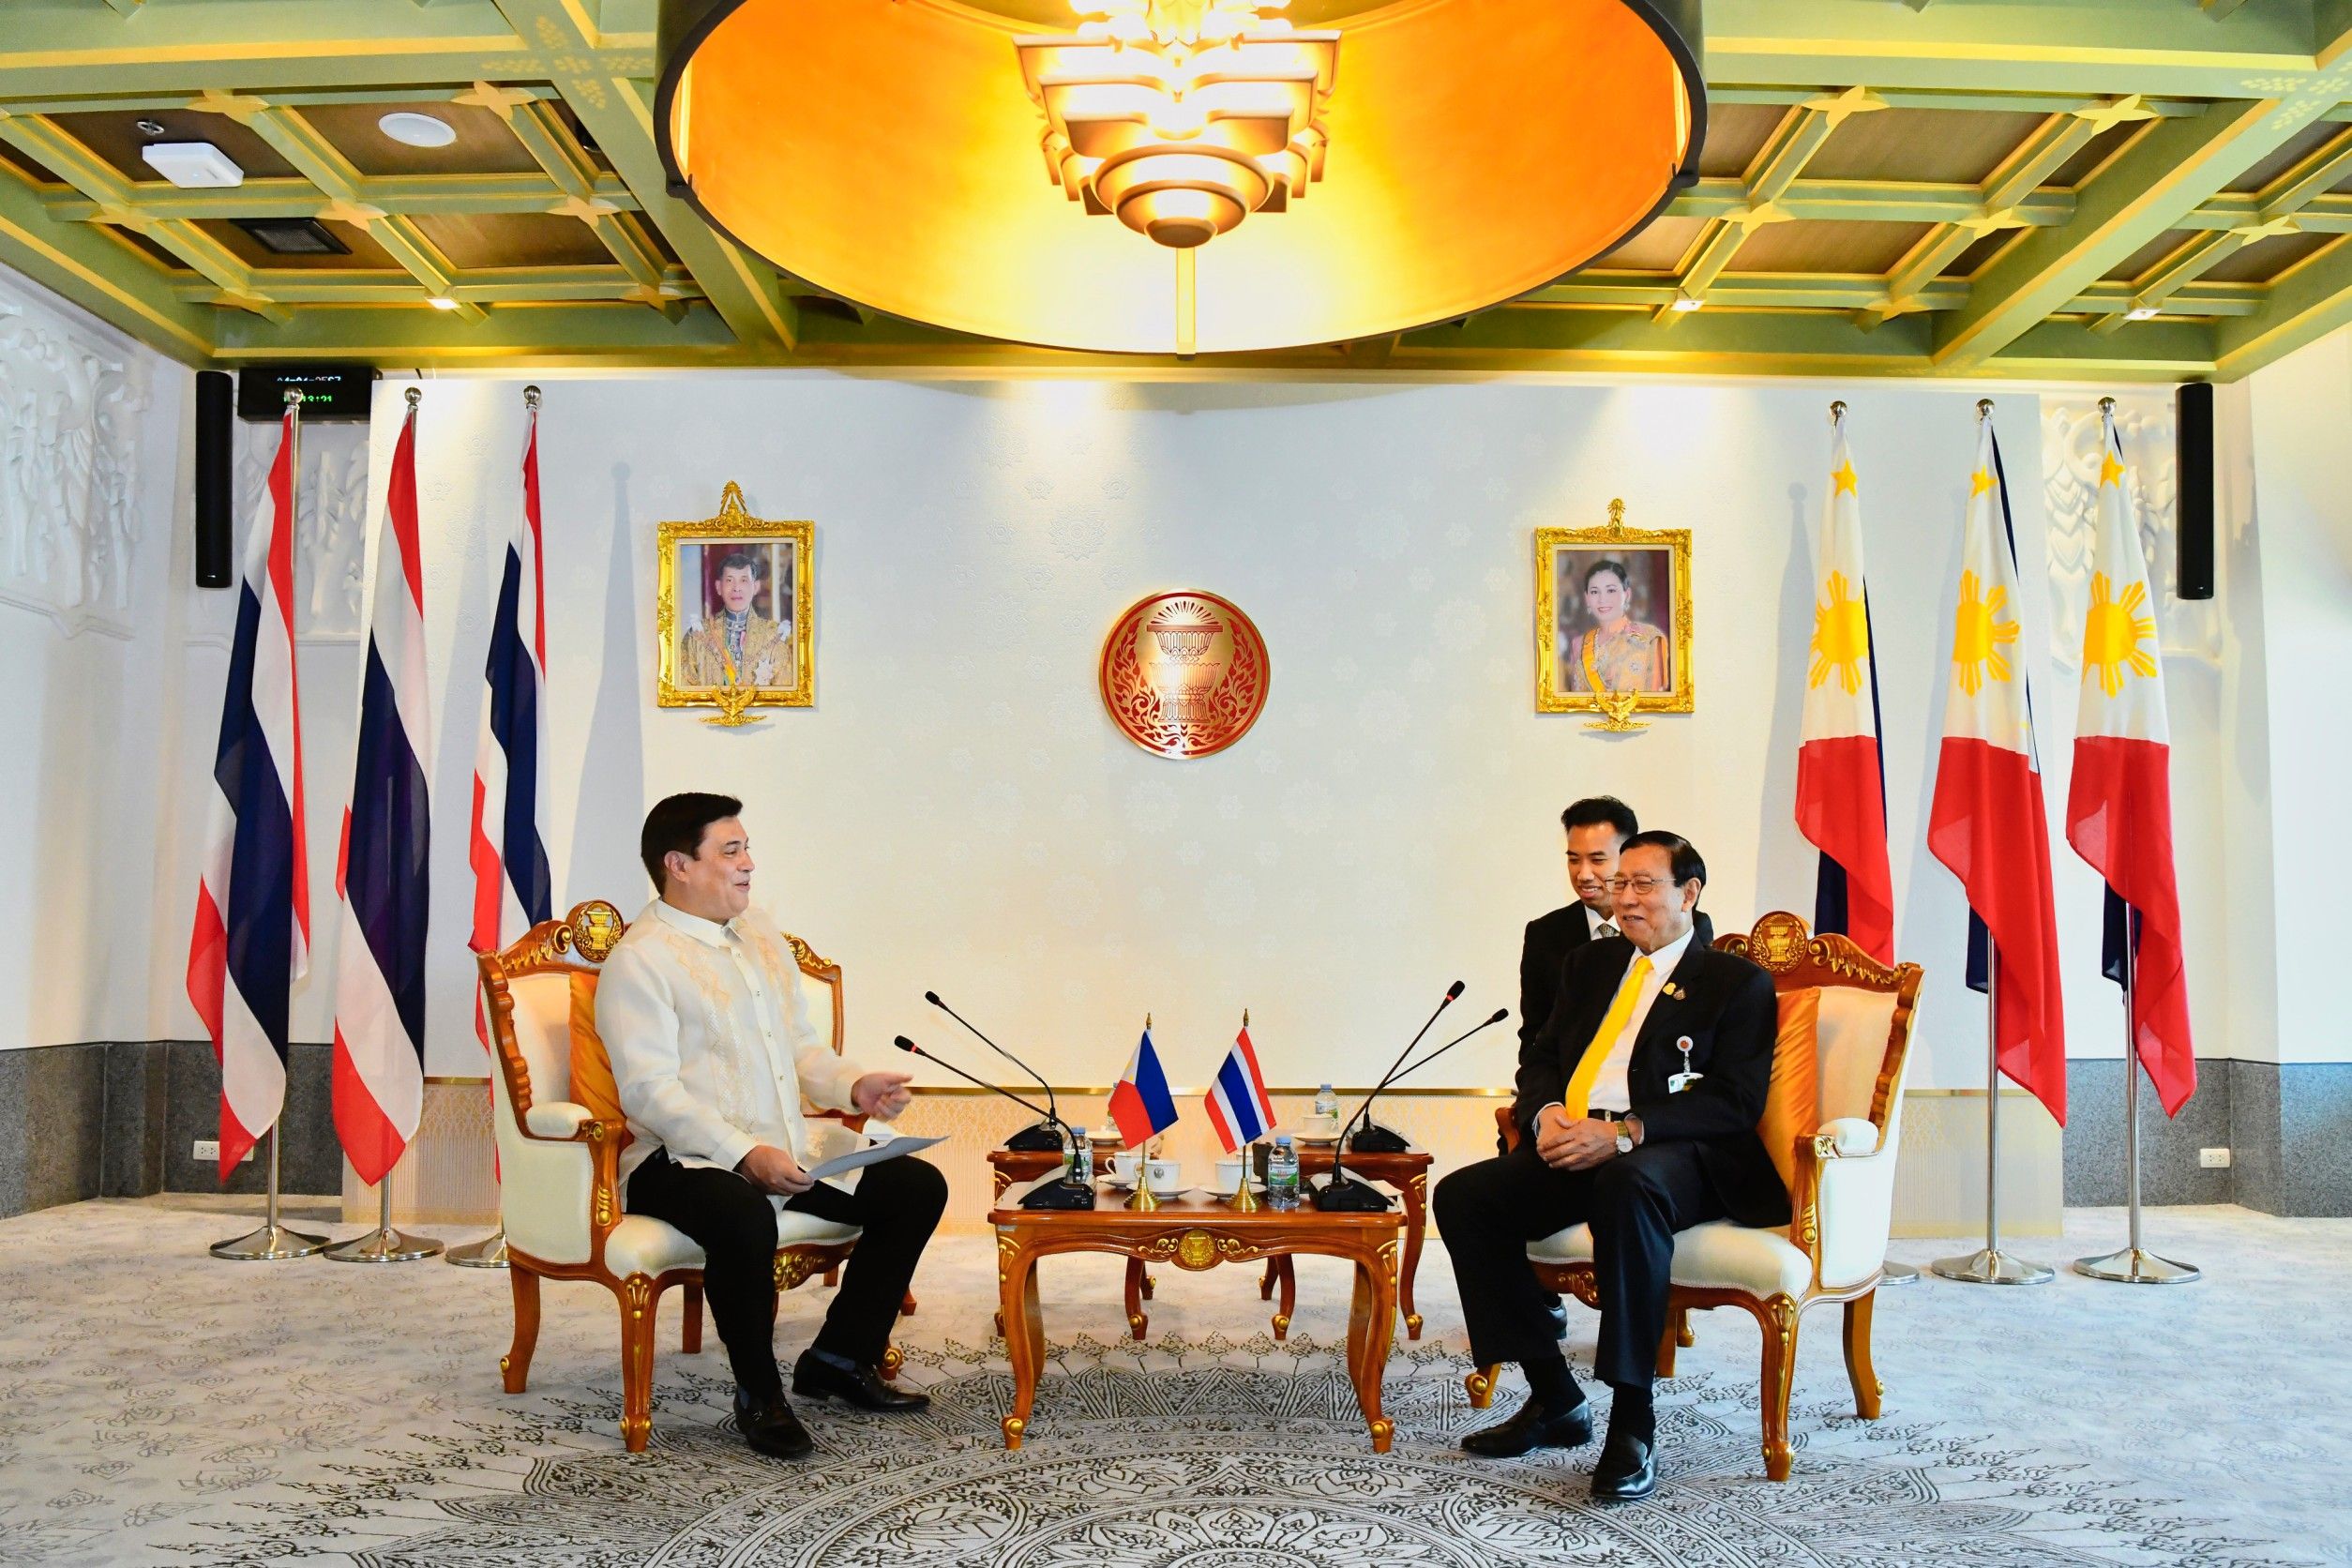 H.E. Mr. Juan Miguel F. Zubiri President of the Senate of the Republic of the Philippines on the Occasion of the Official Visit to Thailand.